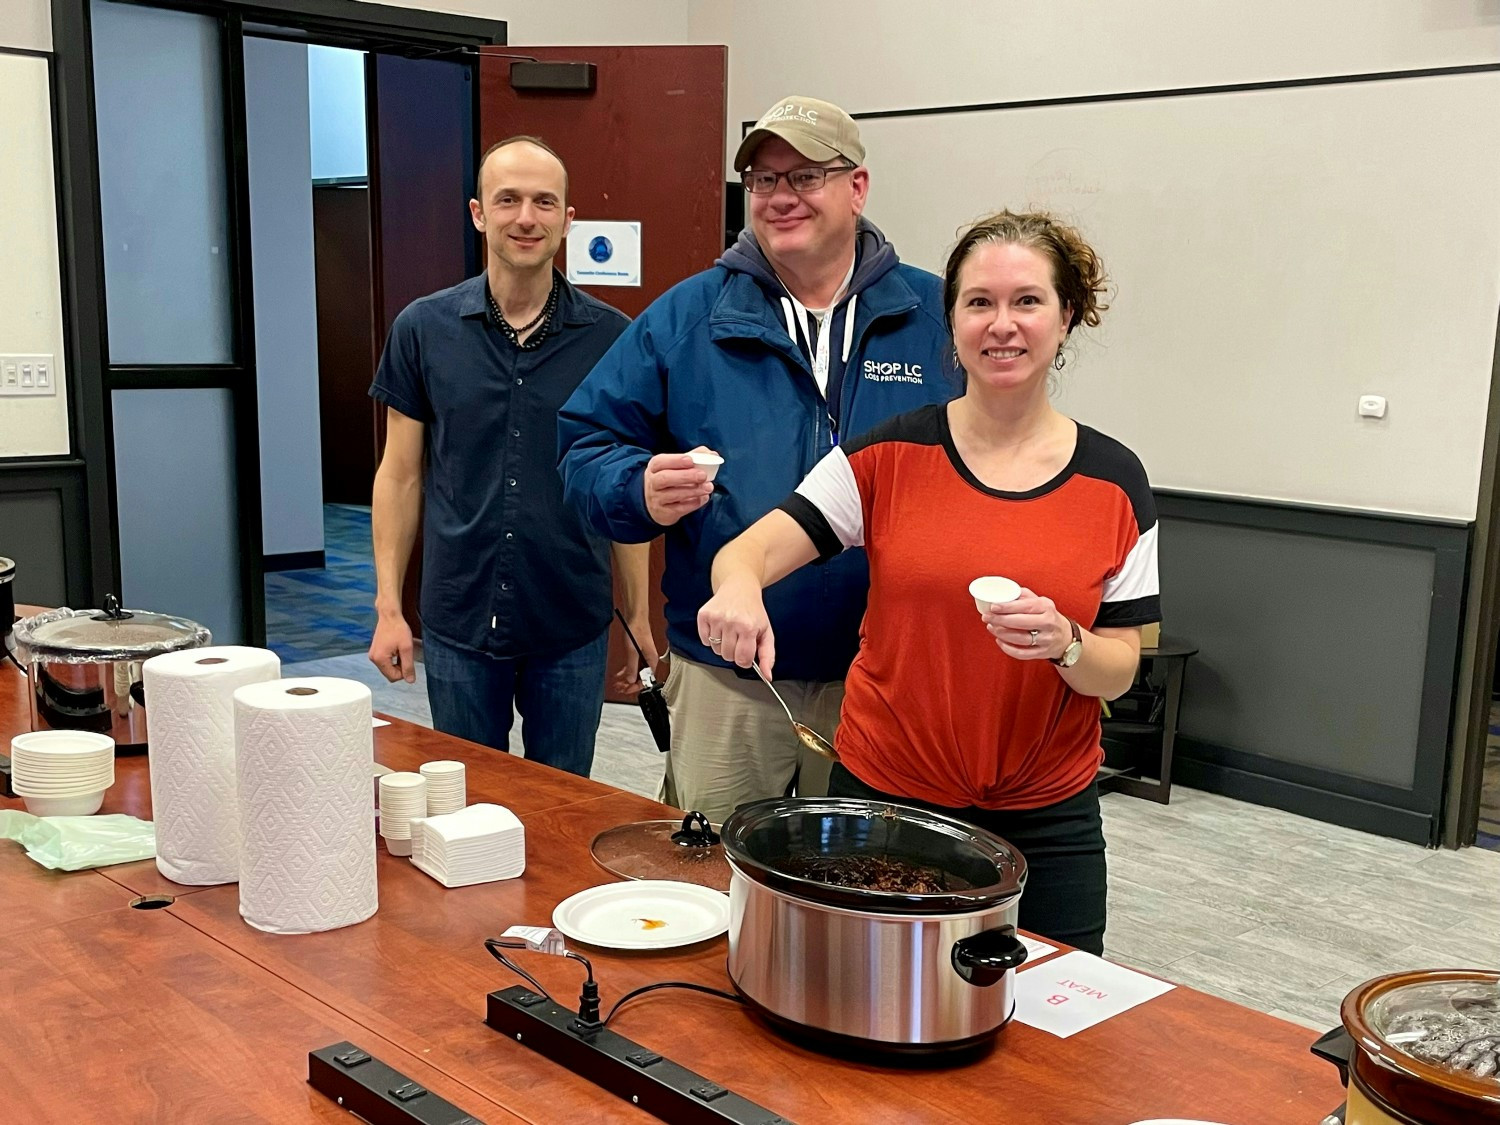 Tasting chili for our Chili cook off!